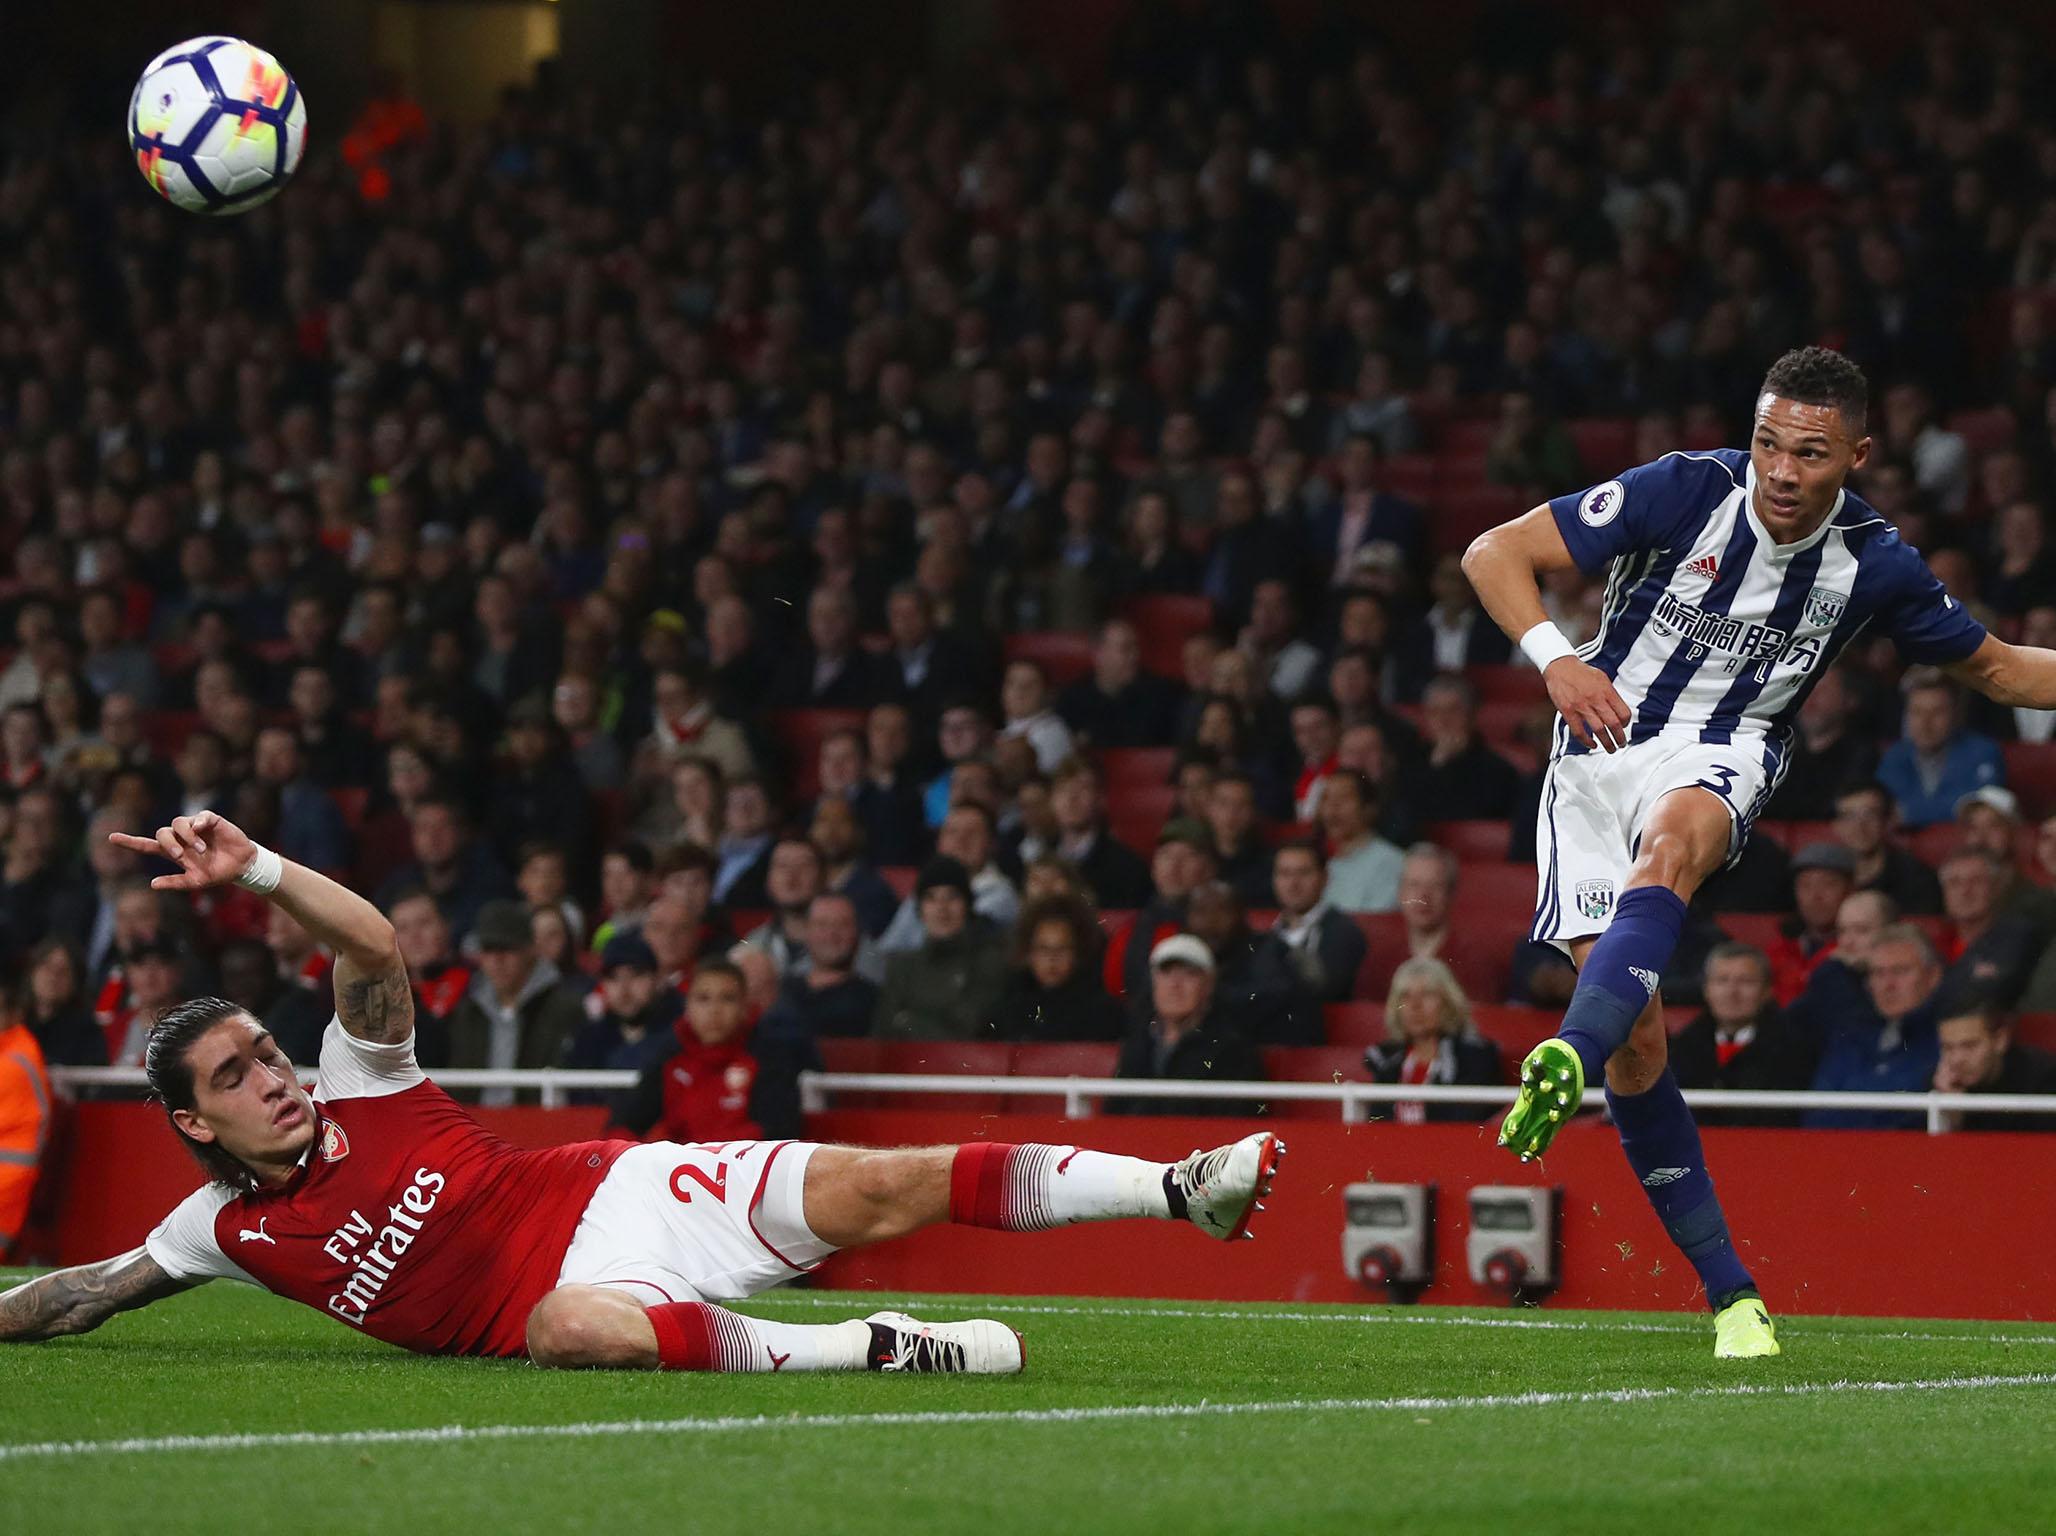 Gibbs impressed getting forward for the Baggies